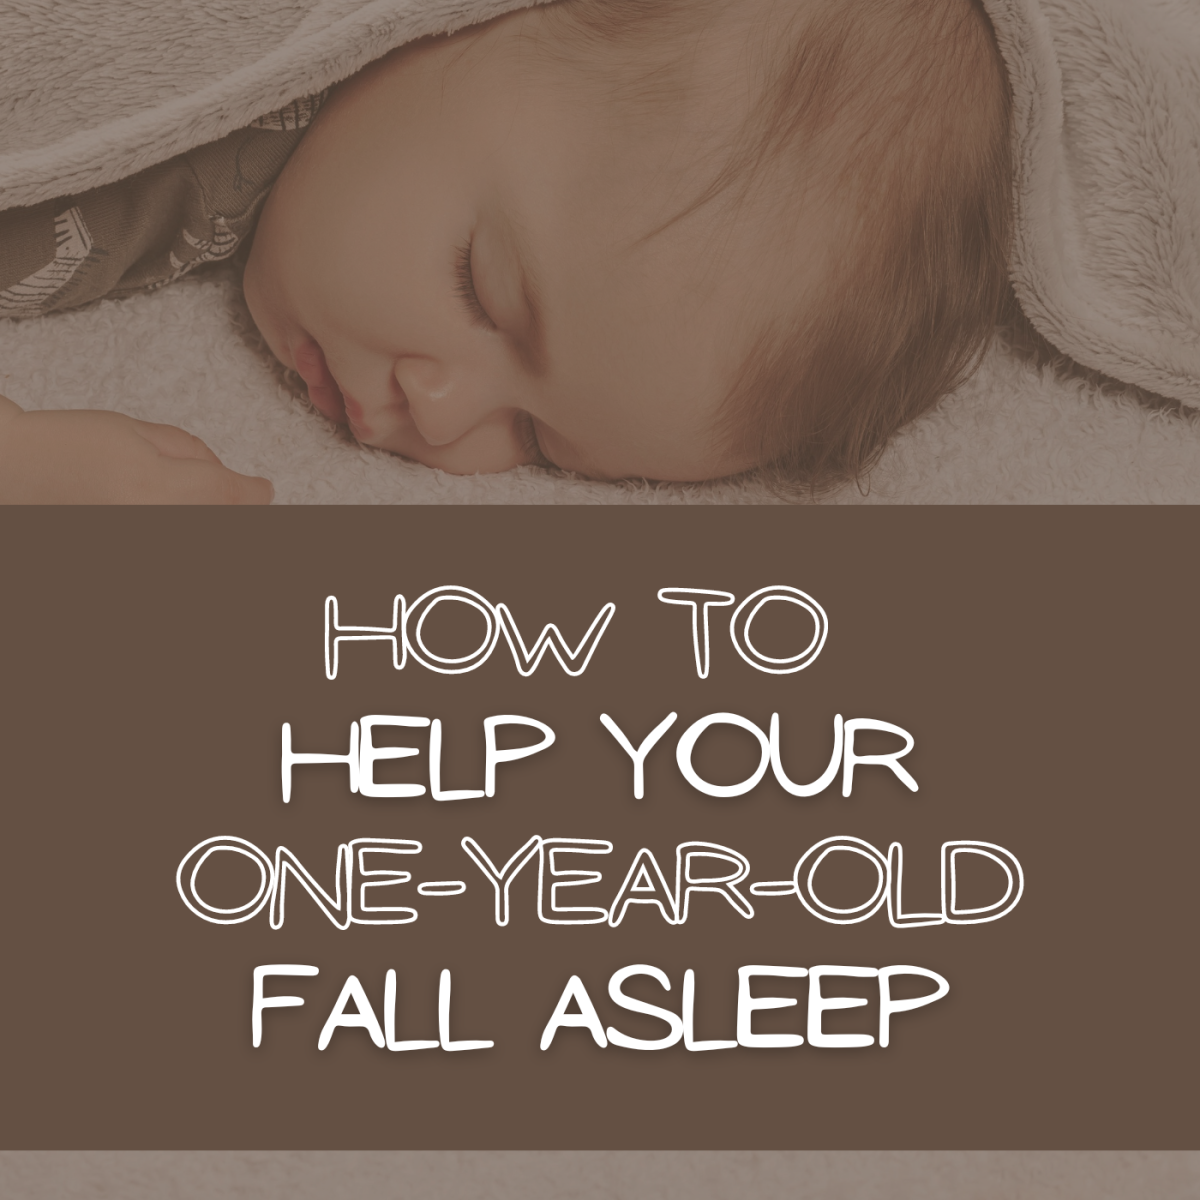 Tips and tricks for helping your little one fall asleep.